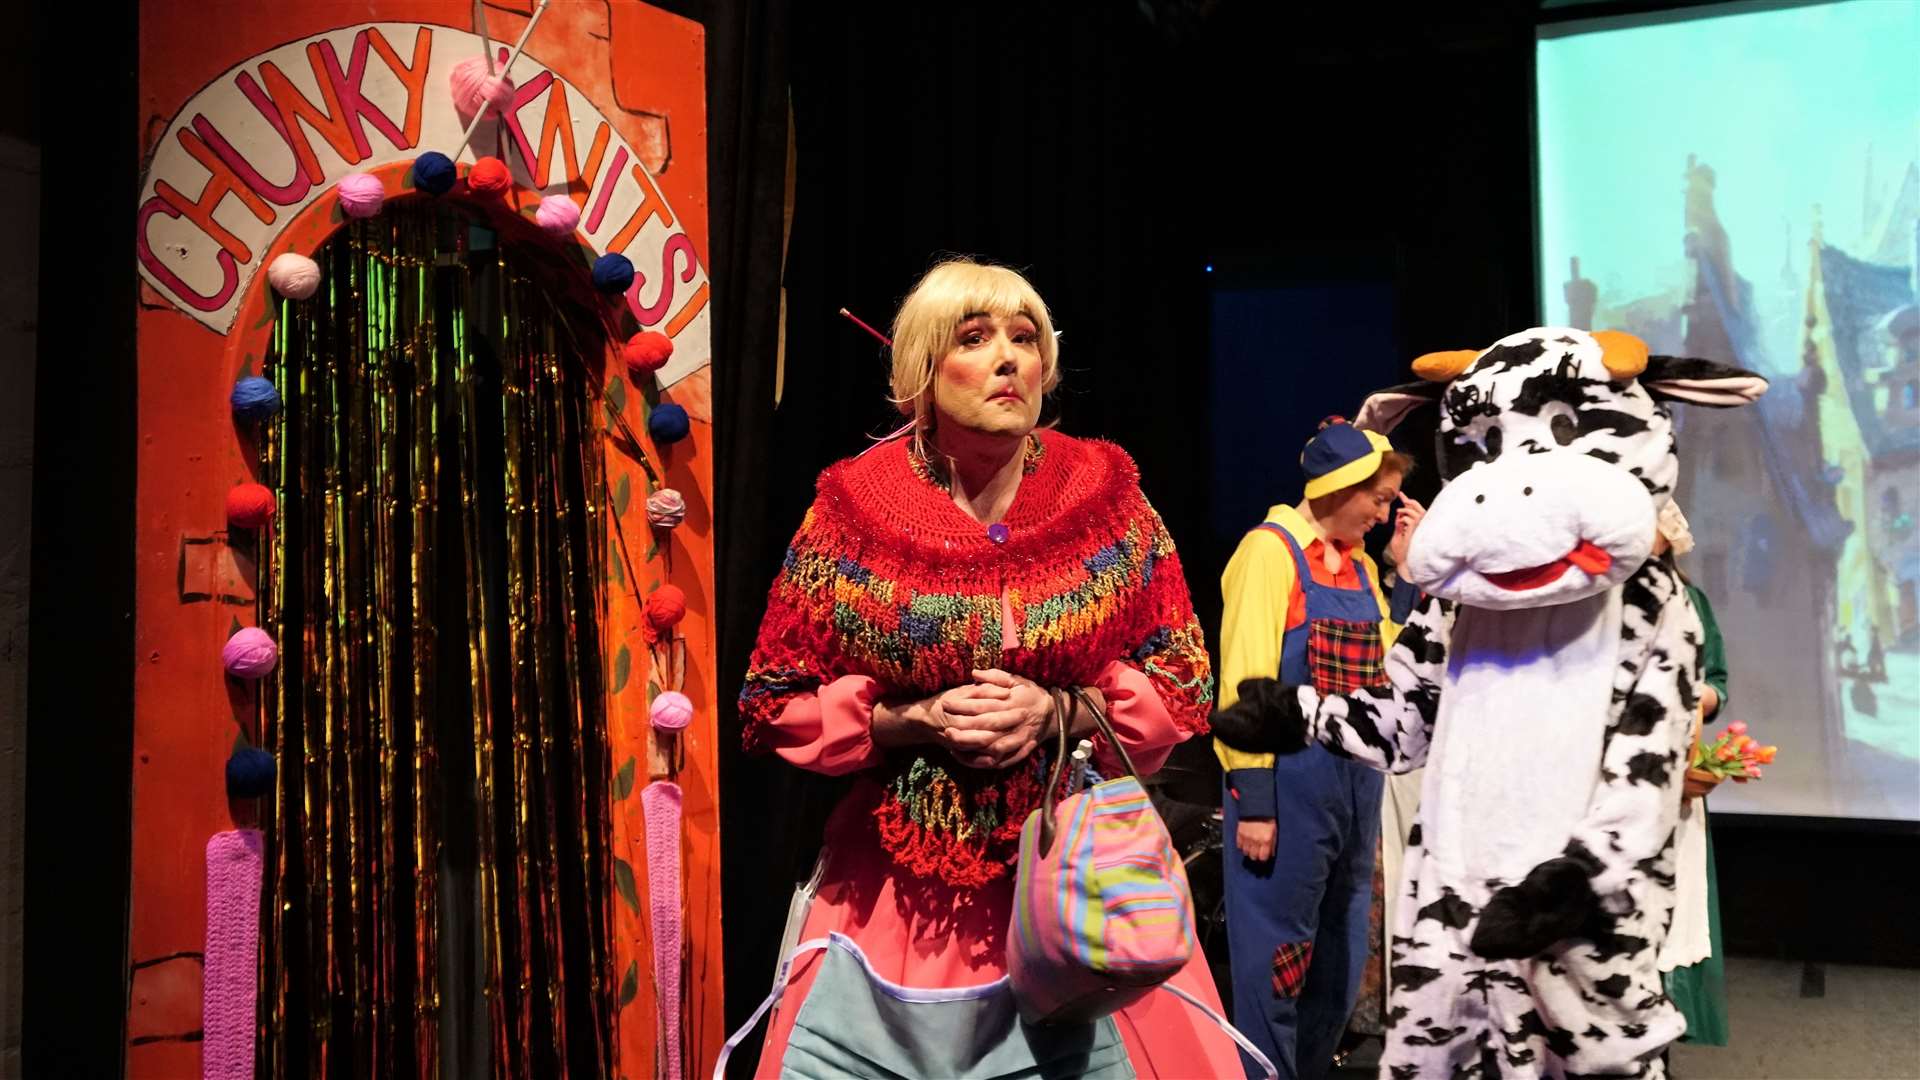 No panto would be complete without a dame. Alan Newton gives a great performance as Dame Dolly and is ably supported by Maria the cow-llama. Picture: DGS